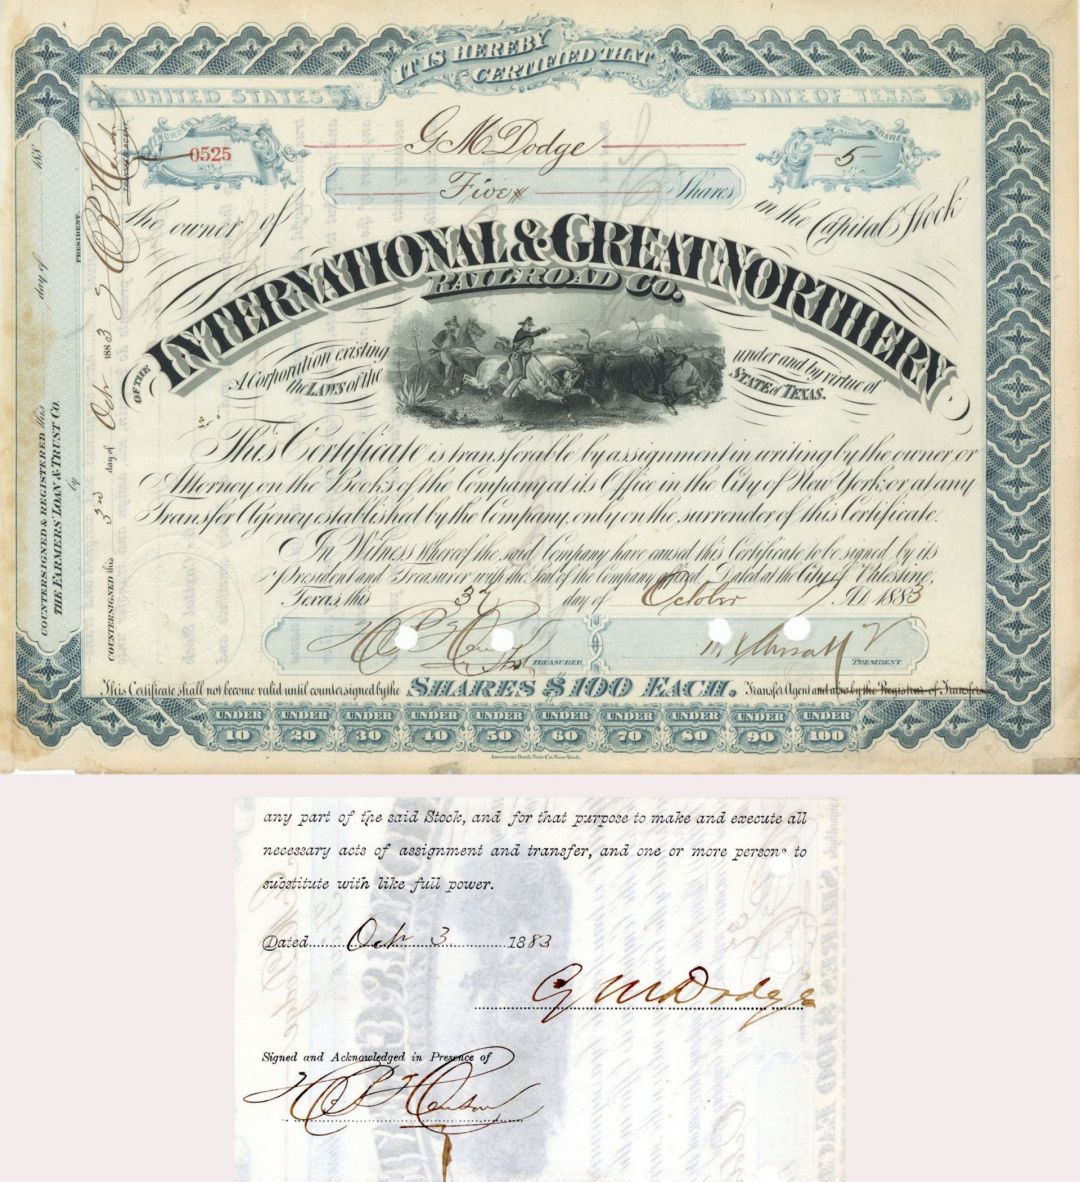 International and Great Northern Railroad Co. Issued to and Signed by G.M. Dodge - Autographed Stocks and Bonds